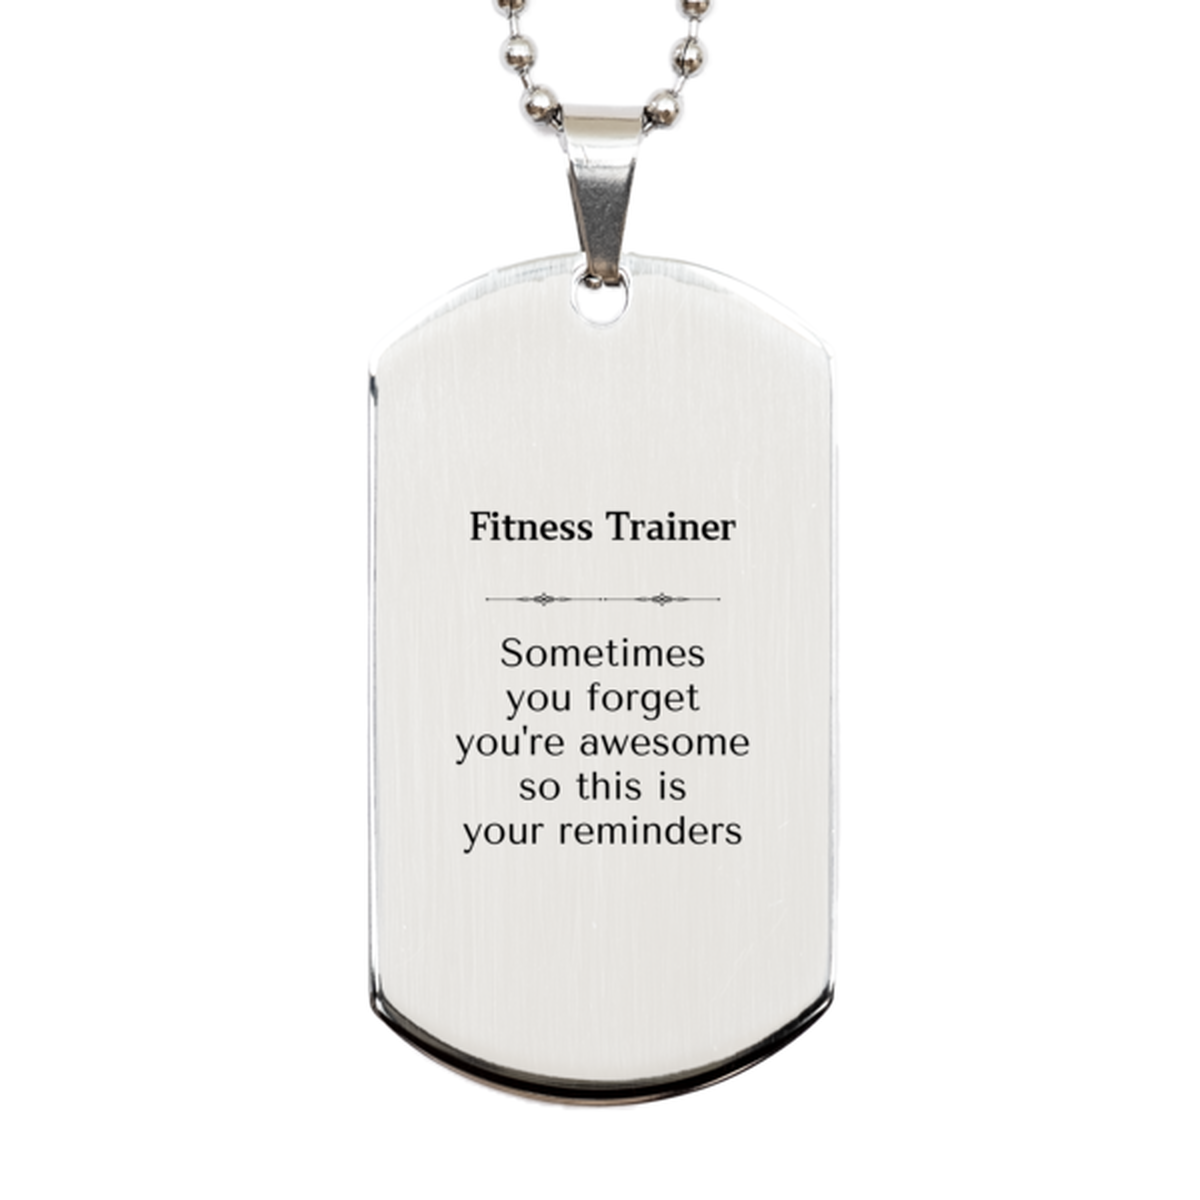 Sentimental Fitness Trainer Silver Dog Tag, Fitness Trainer Sometimes you forget you're awesome so this is your reminders, Graduation Christmas Birthday Gifts for Fitness Trainer, Men, Women, Coworkers